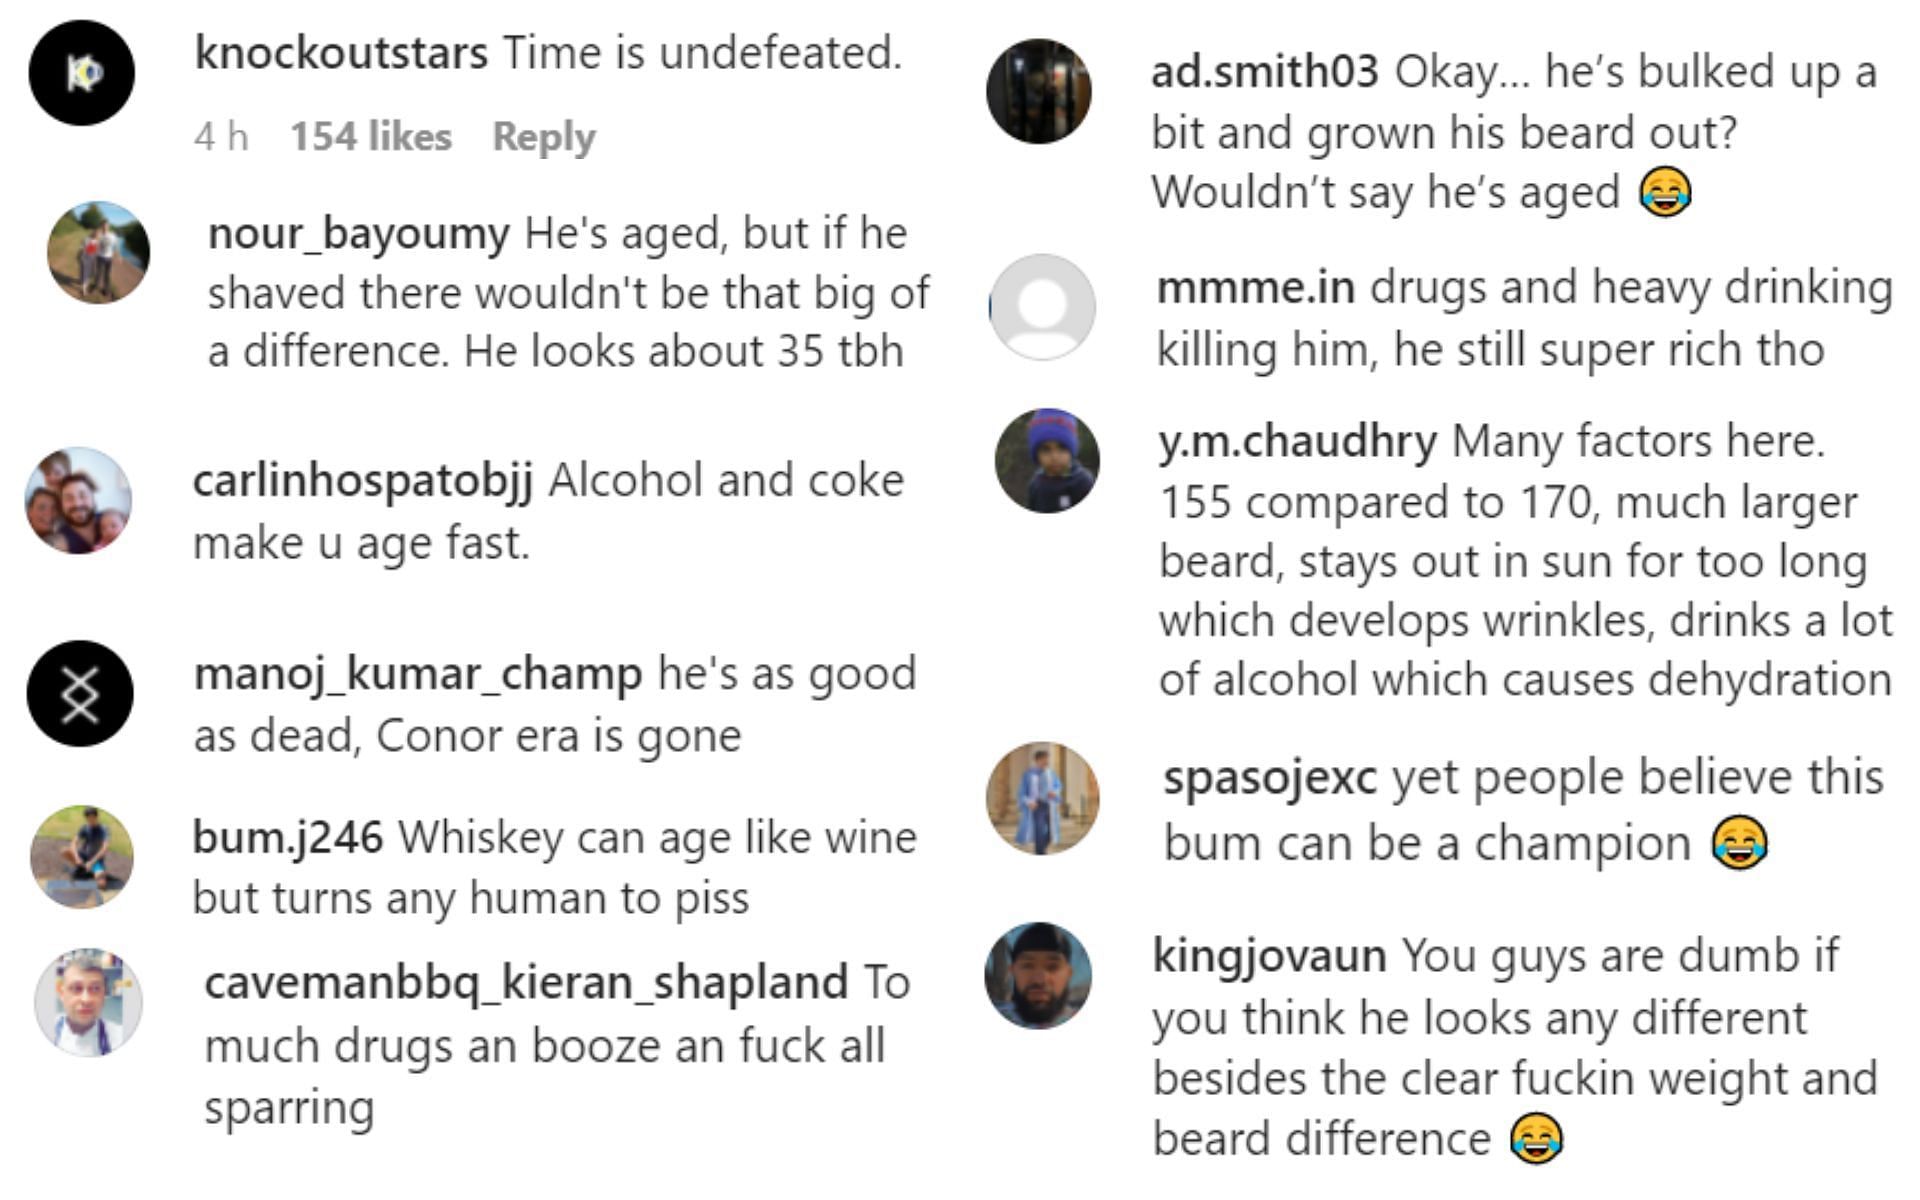 Fans comment on the post debating on how McGregor has aged.